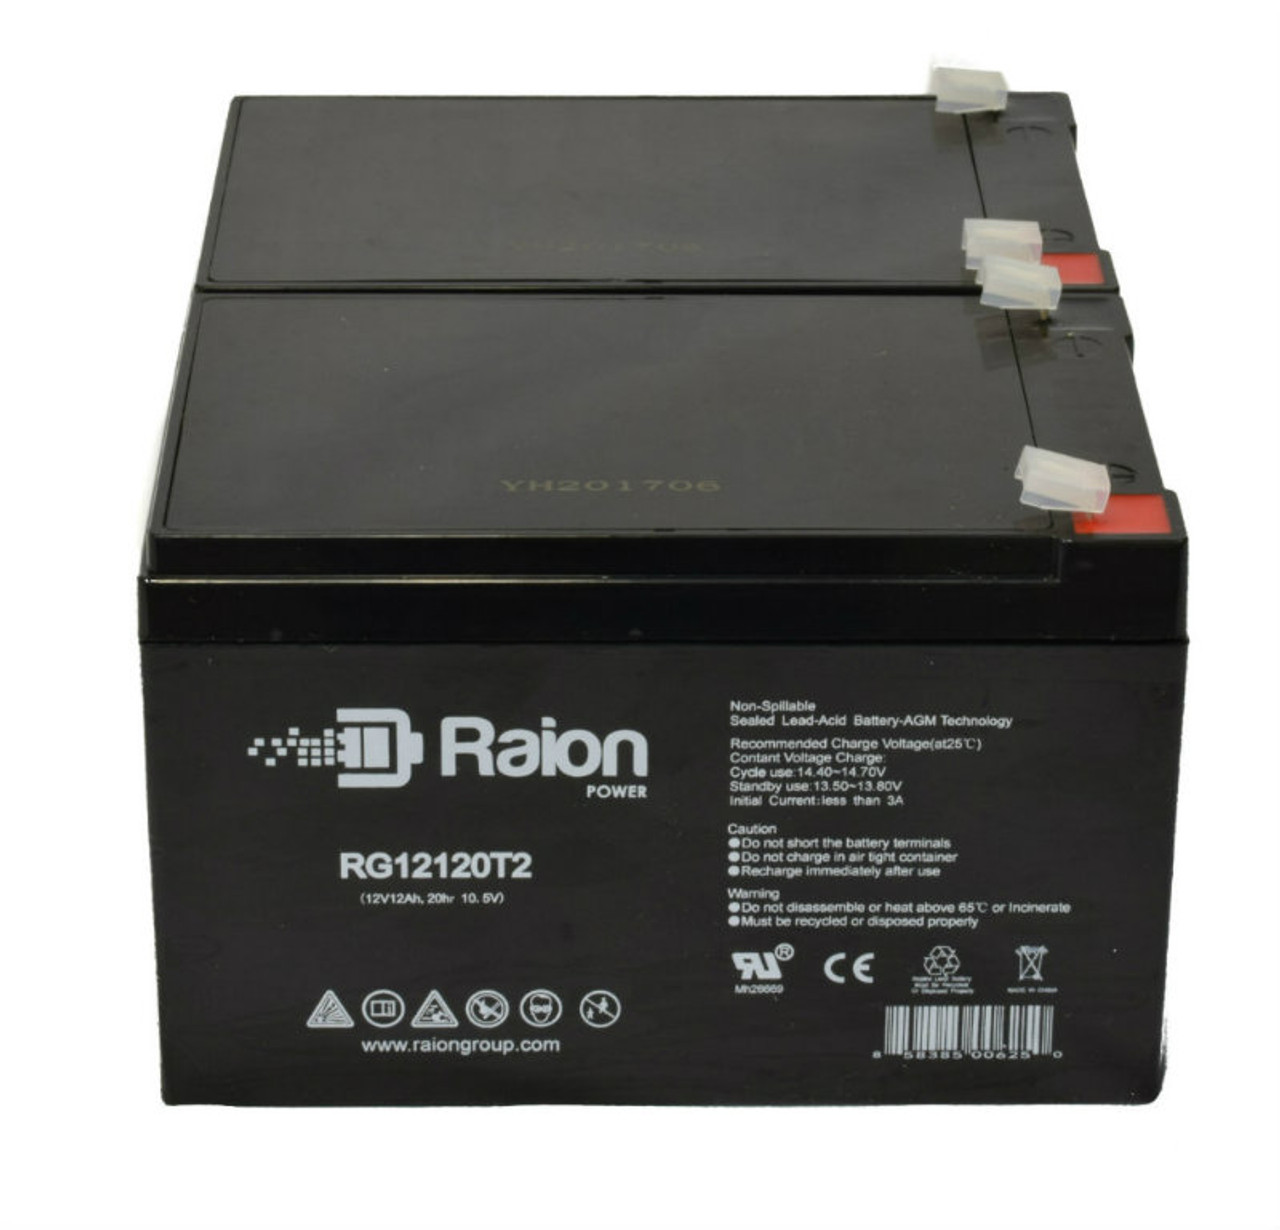 Raion Power 12V 12Ah Non-Spillable Compatible Replacement Battery for Napel NP12140 - (2 Pack)